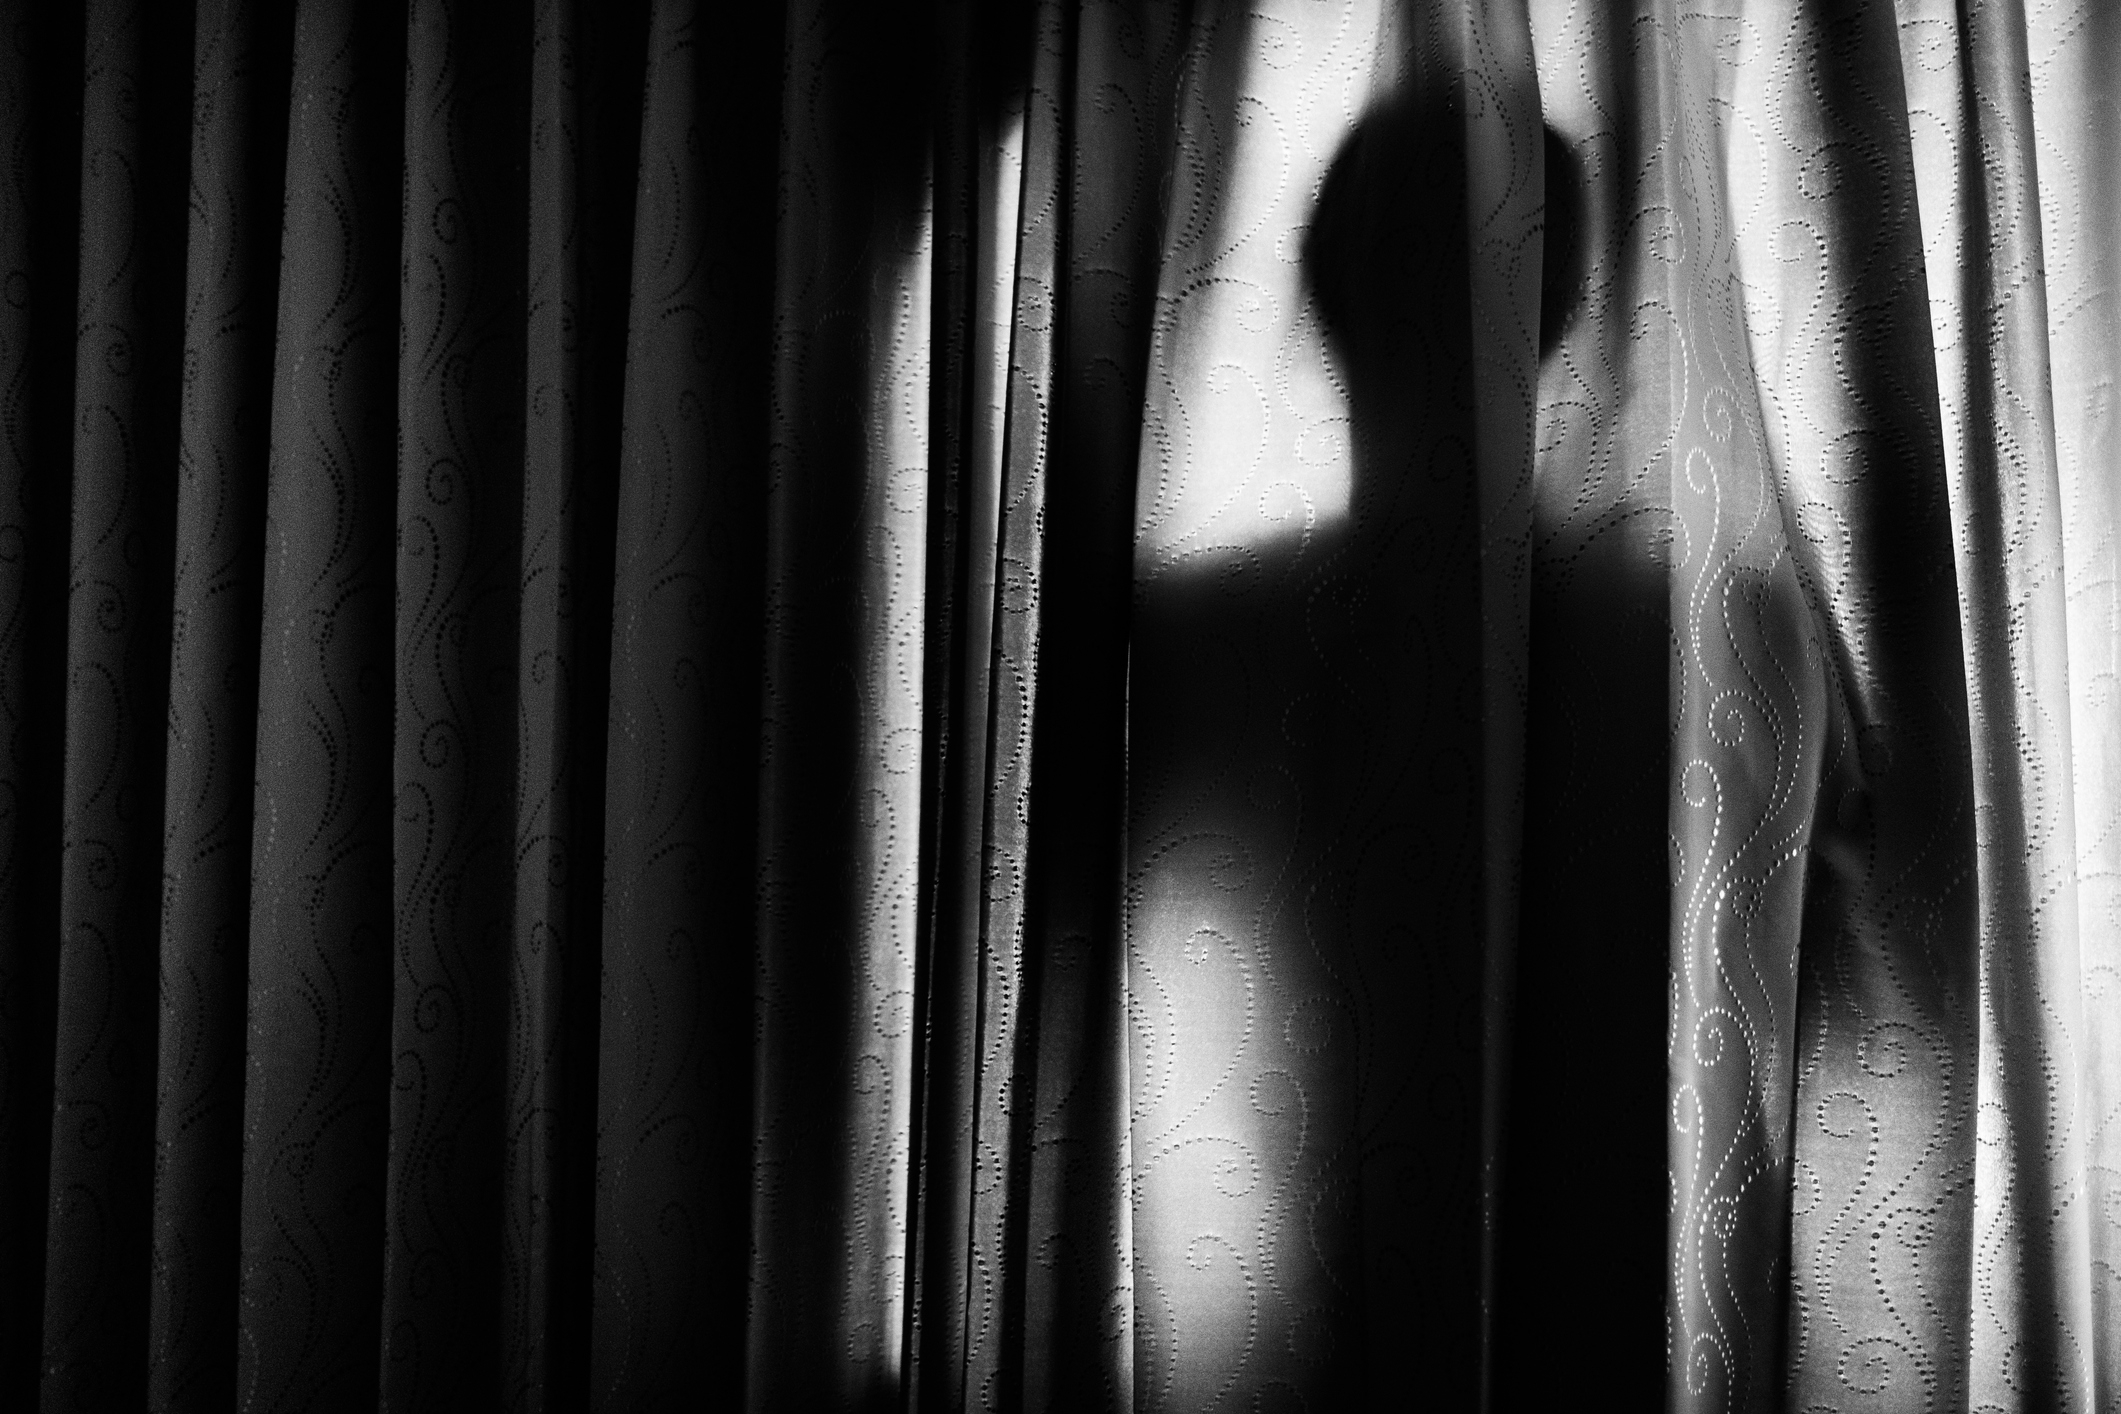 Silhouette of a figure peering through curtains